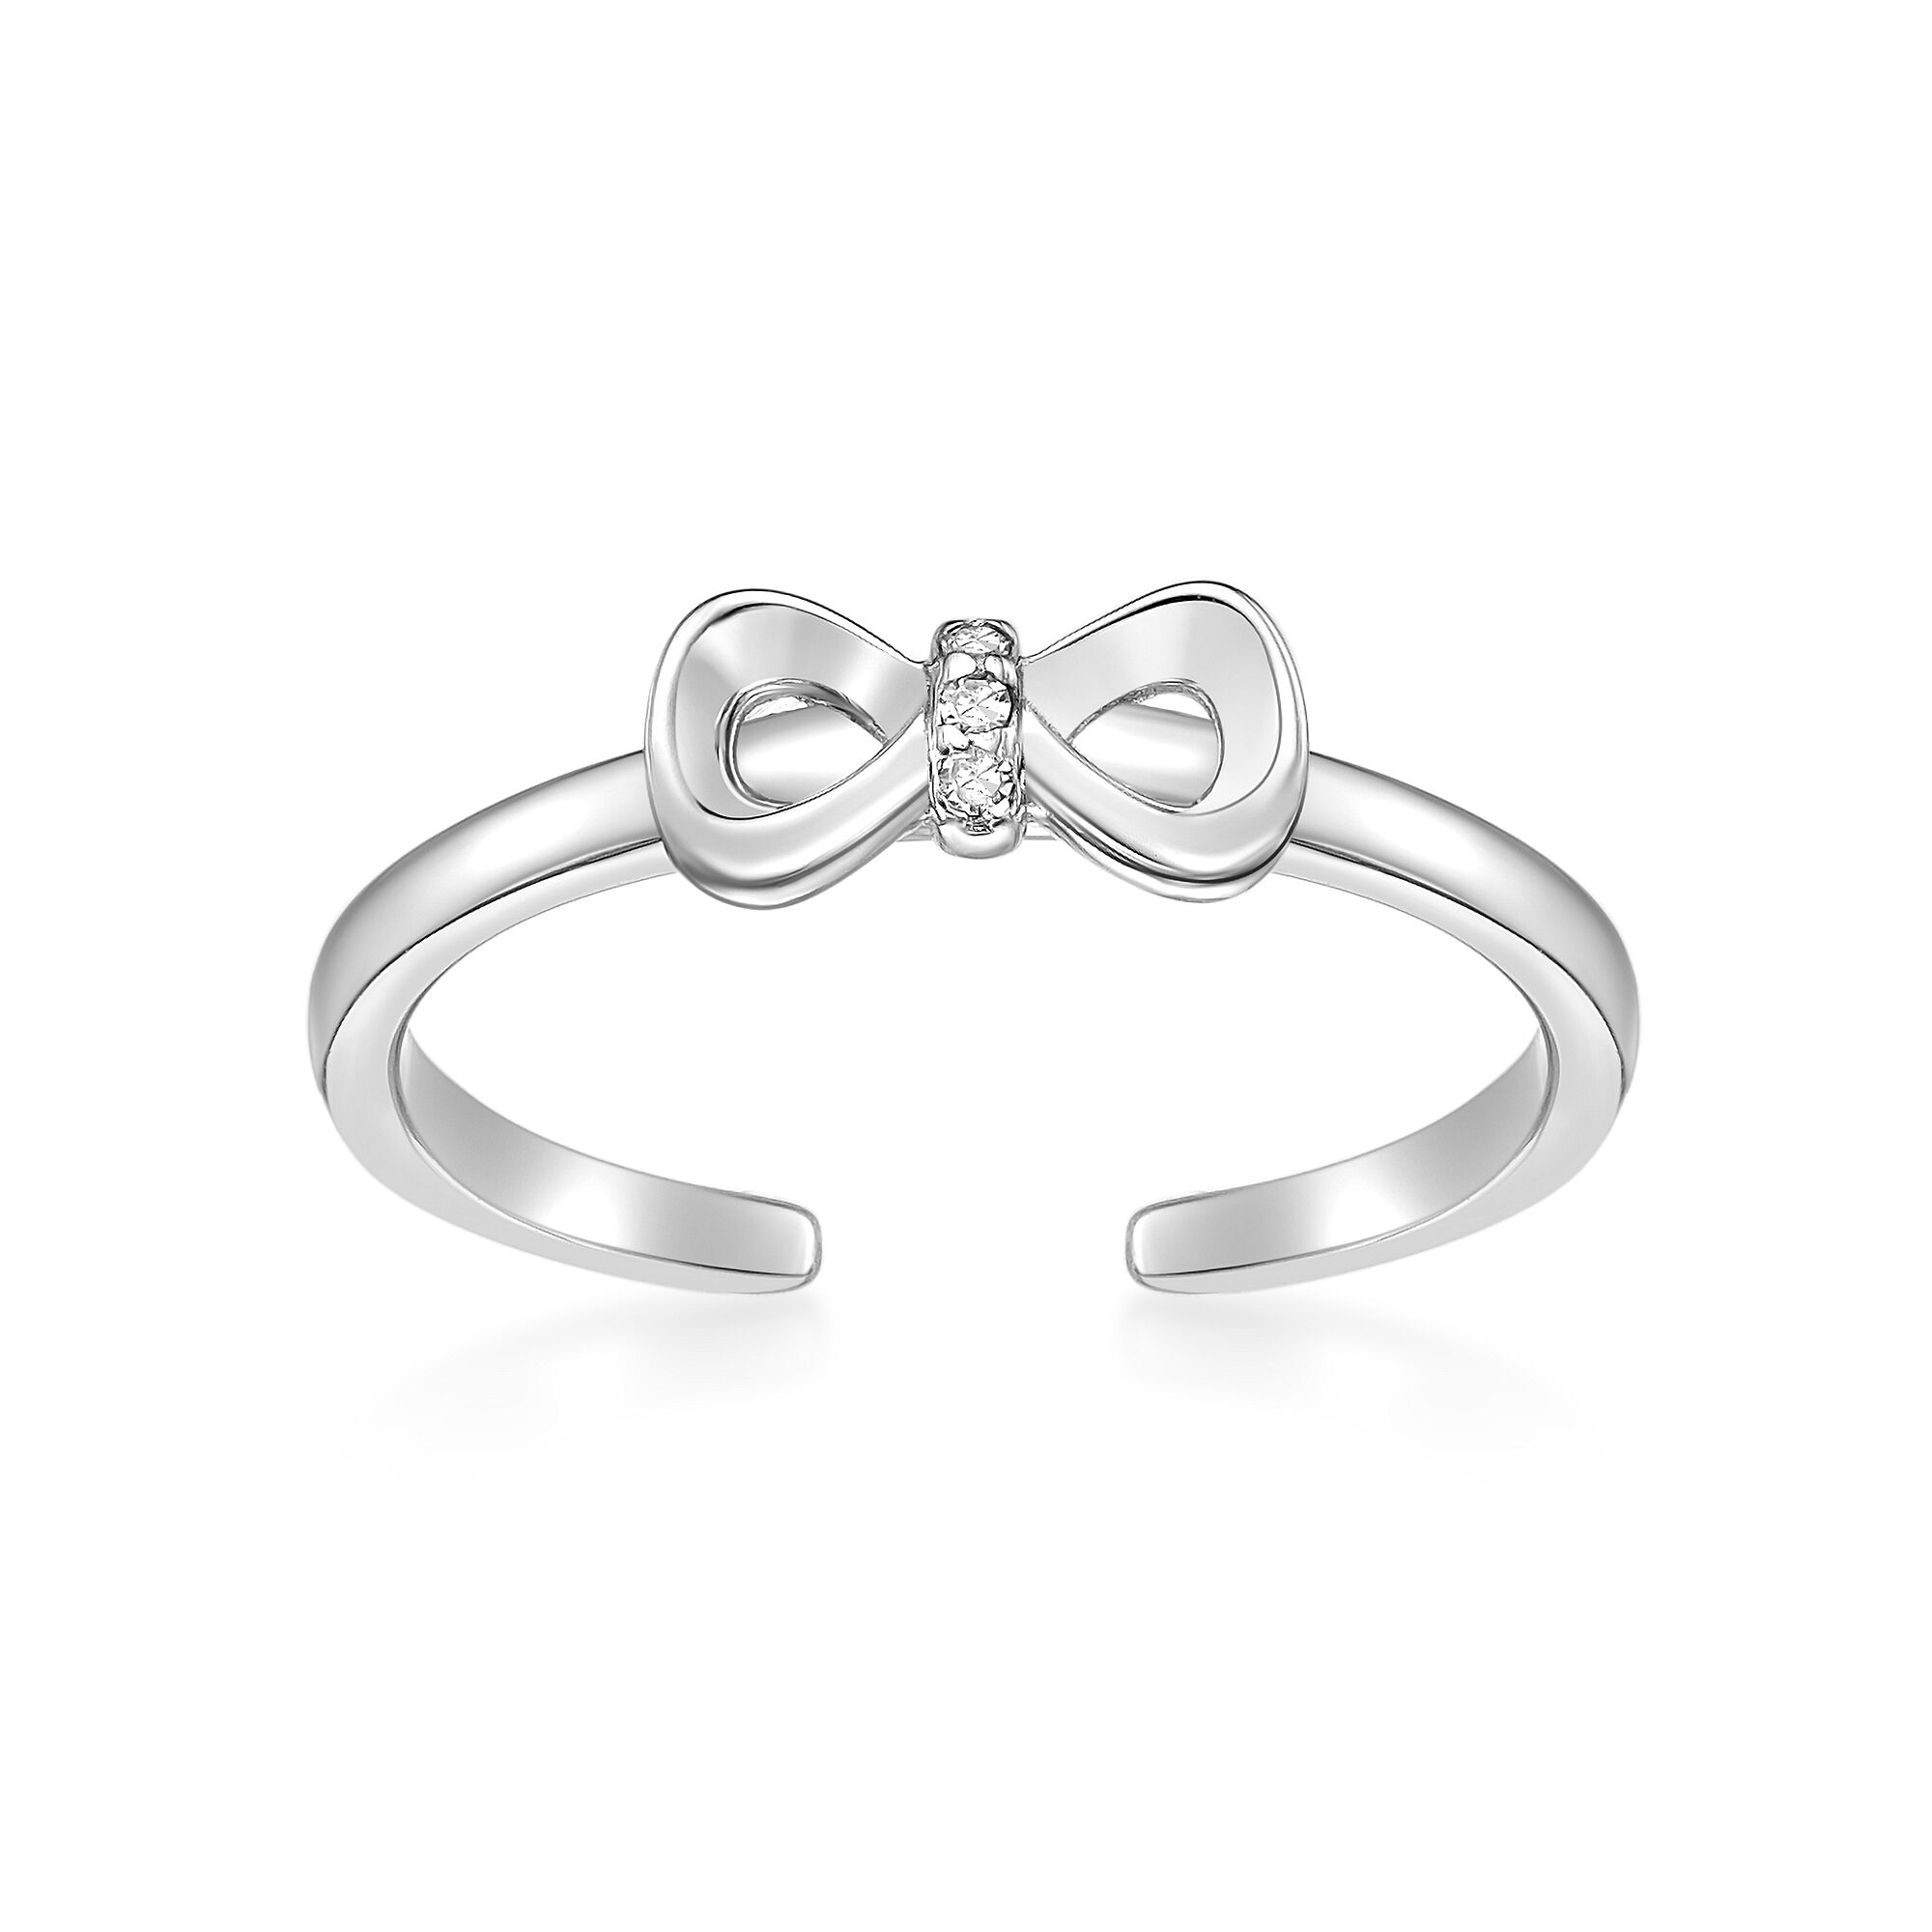 52529-toe-ring-default-collection-sterling-silver-52529.jpg